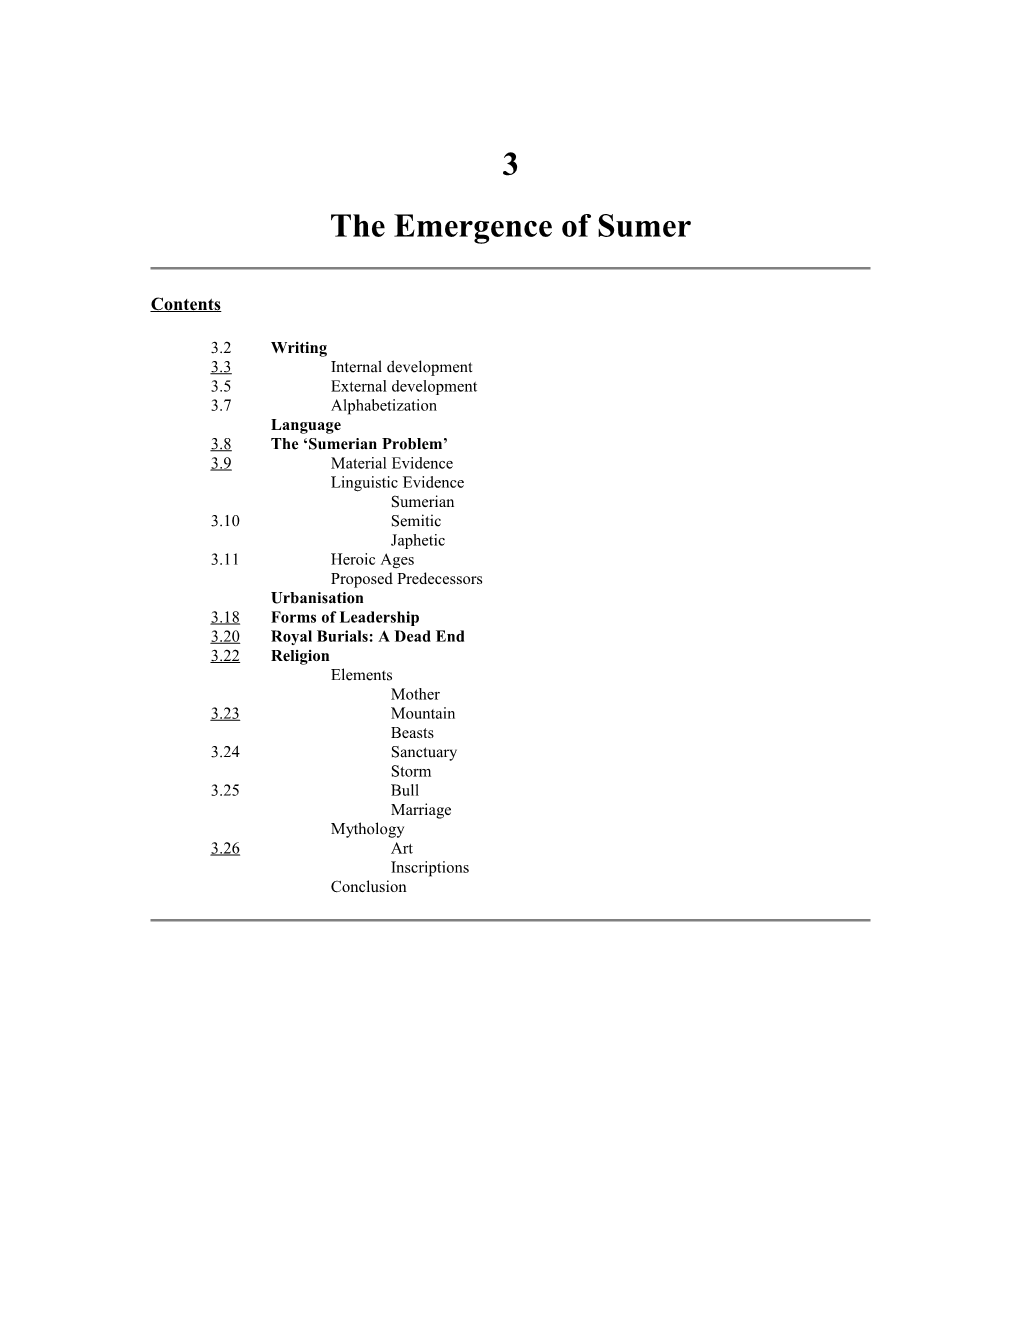 The Emergence of Sumer